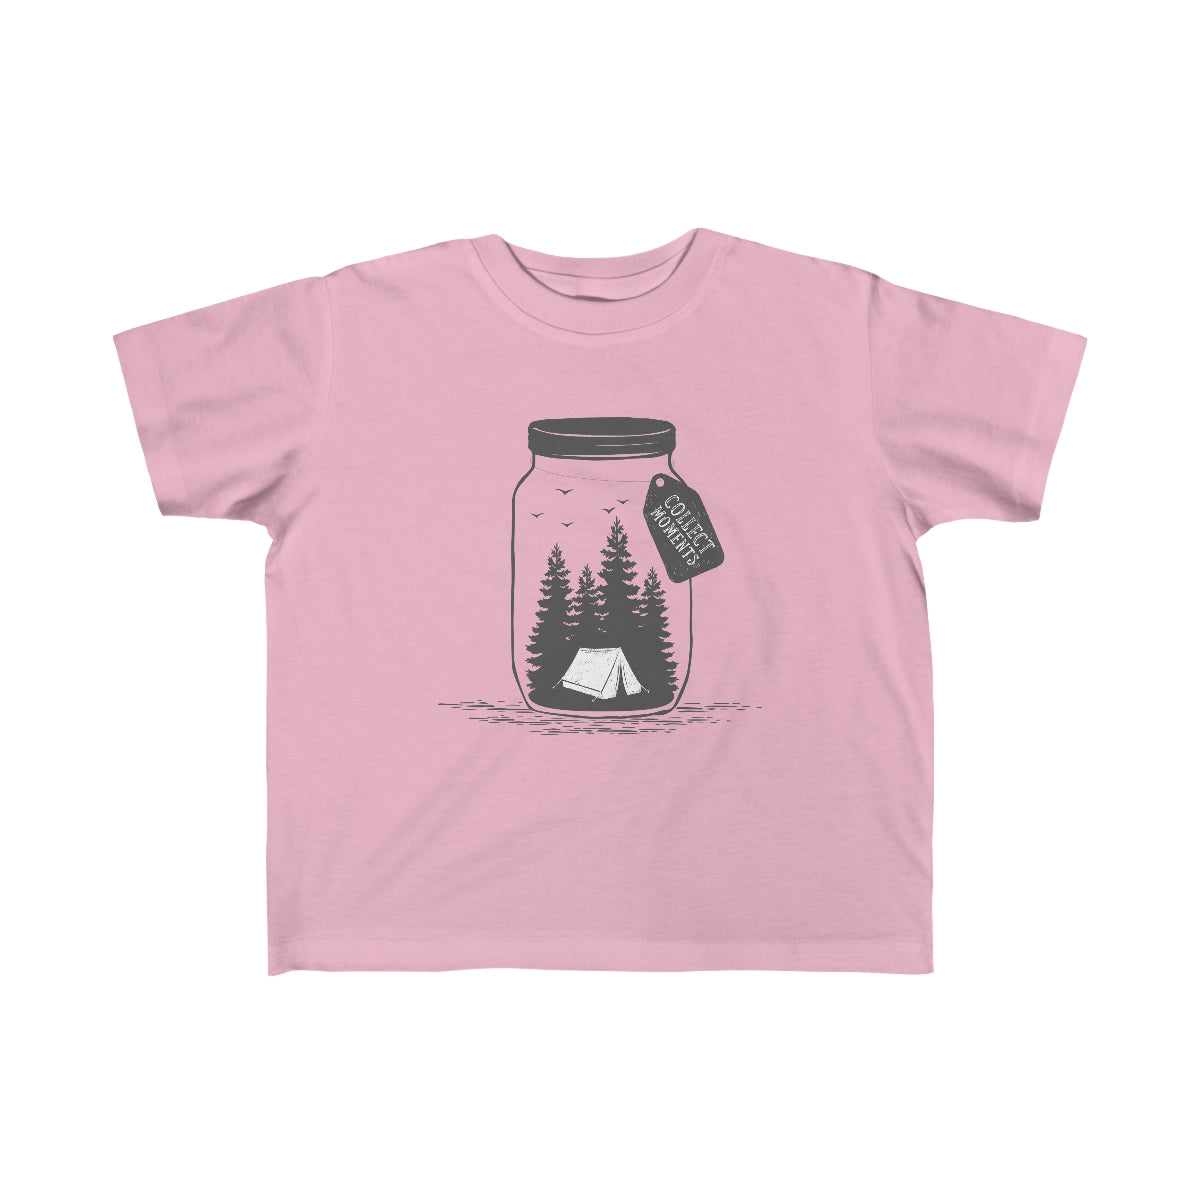 Collect Moments Not Things Toddler Tee Pink / 2T - The Northwest Store